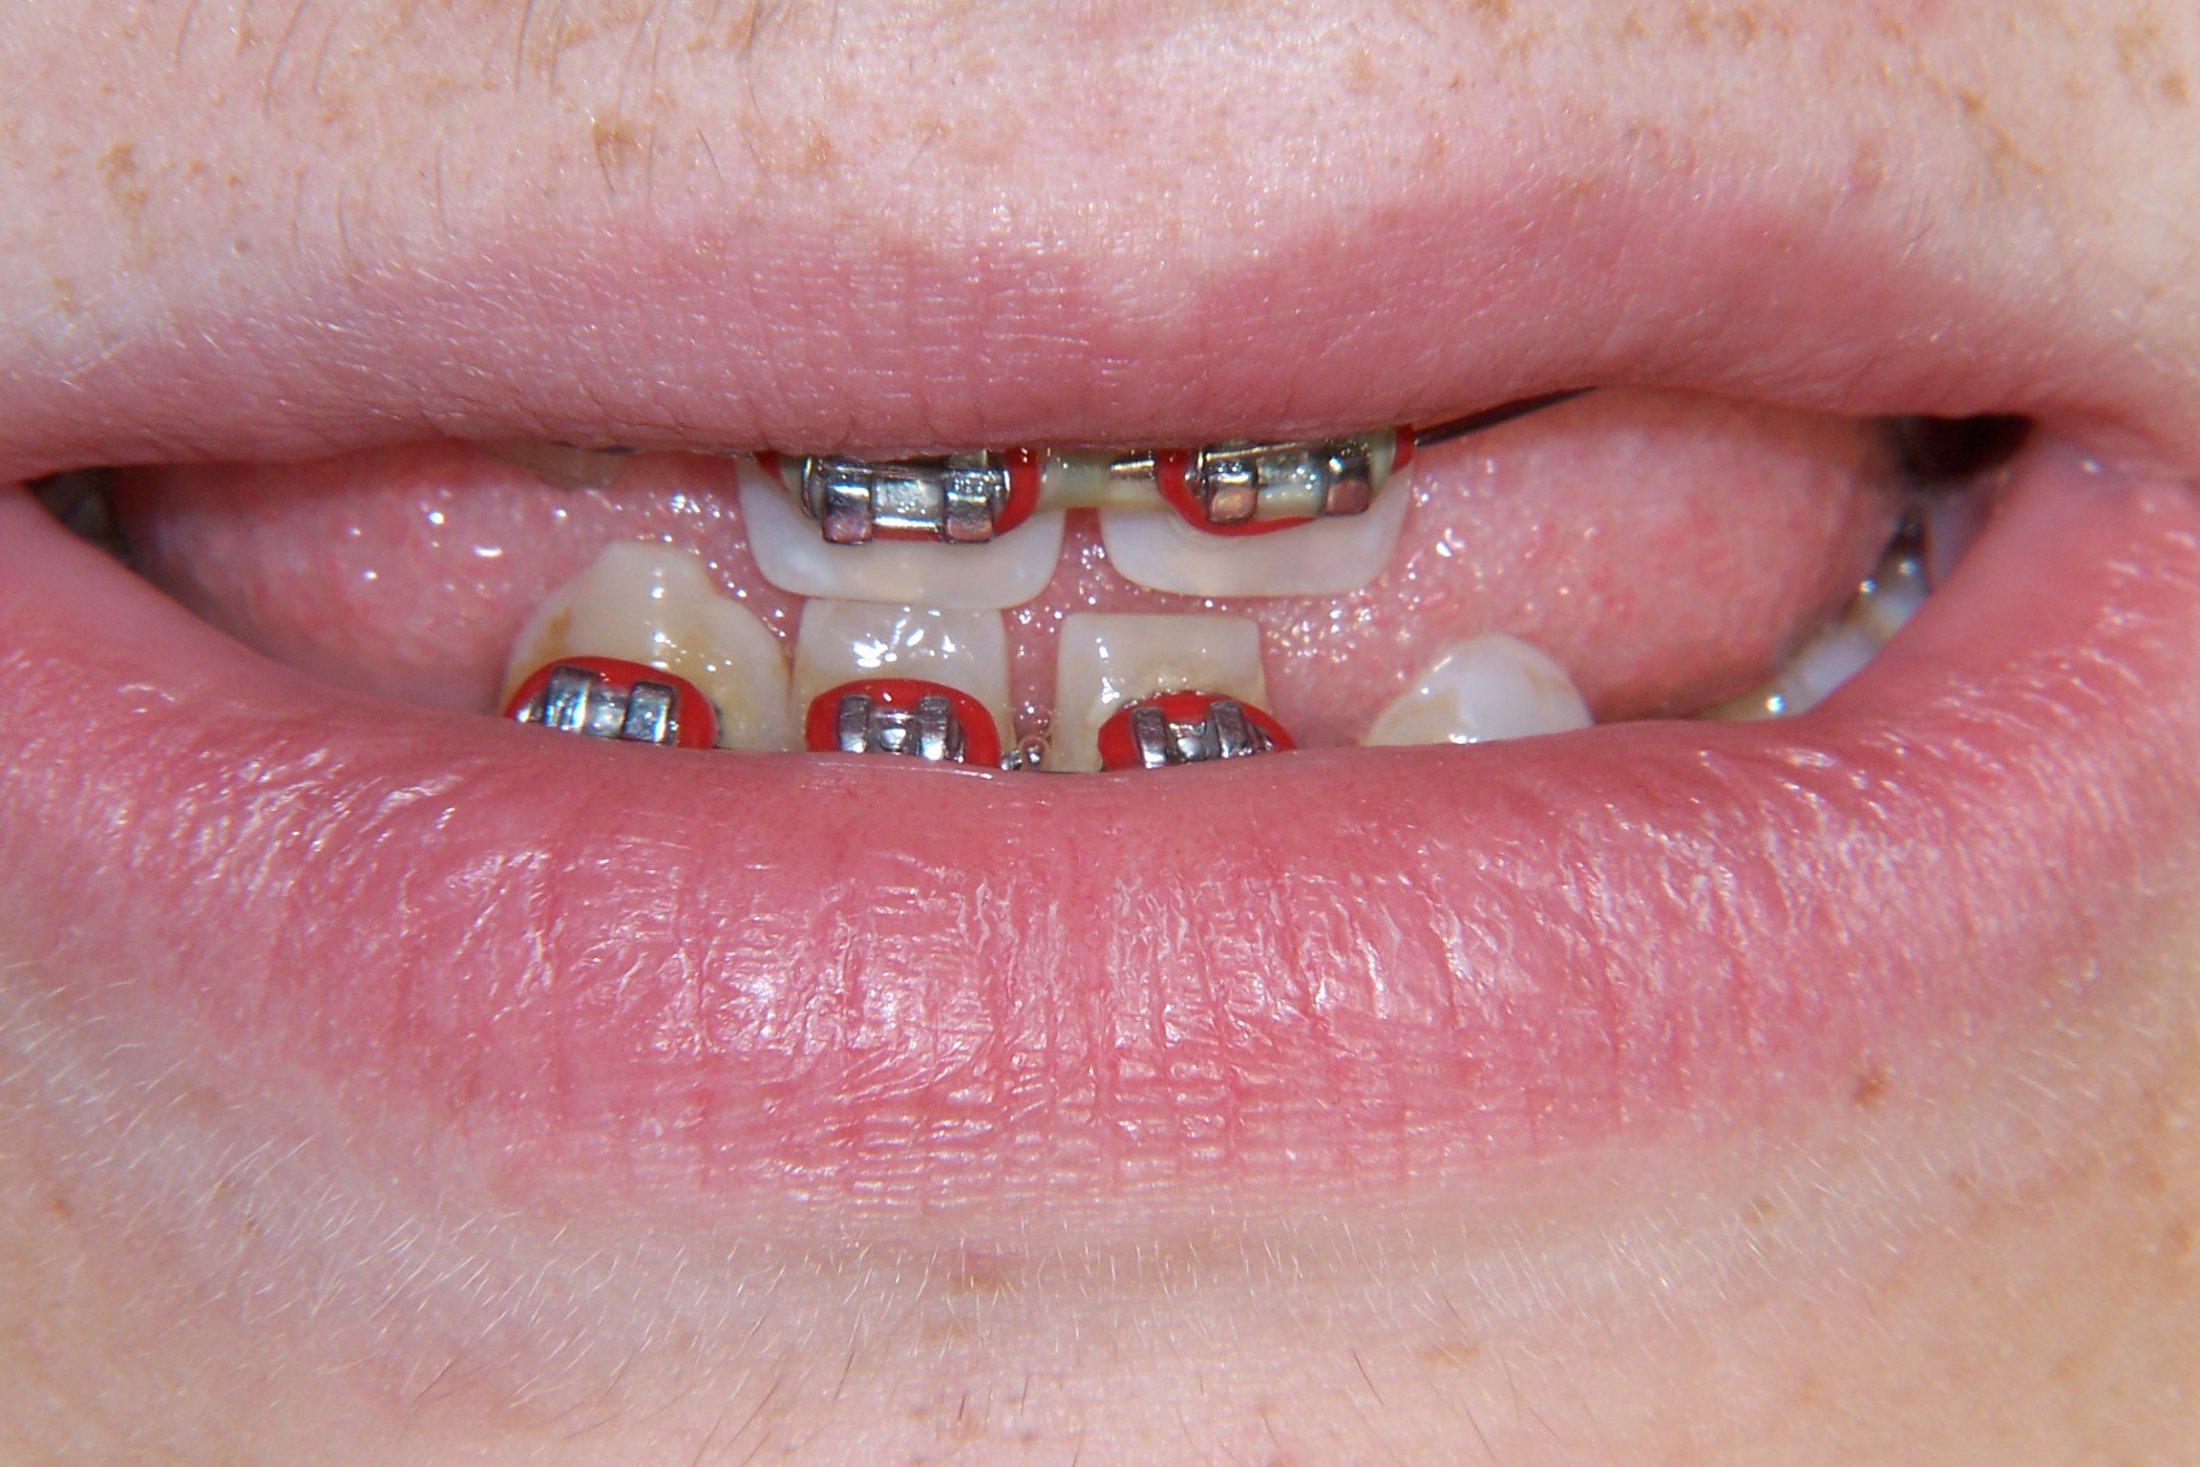 A crooked smile with gaps between teeth shown in the process of having their teeth straightened by braces